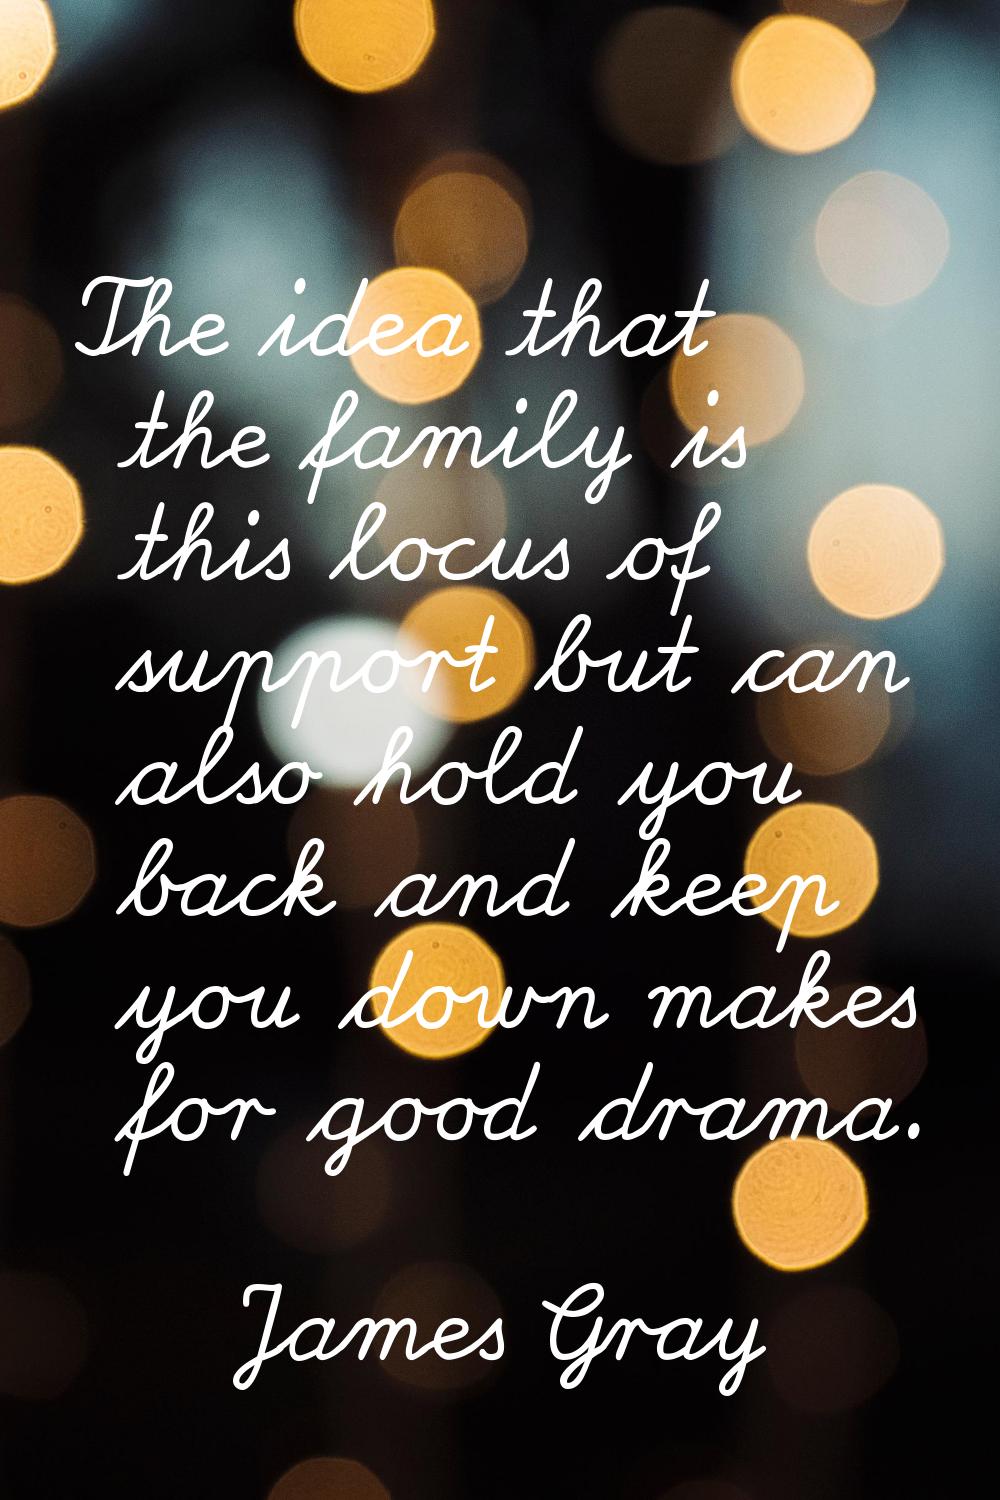 The idea that the family is this locus of support but can also hold you back and keep you down make